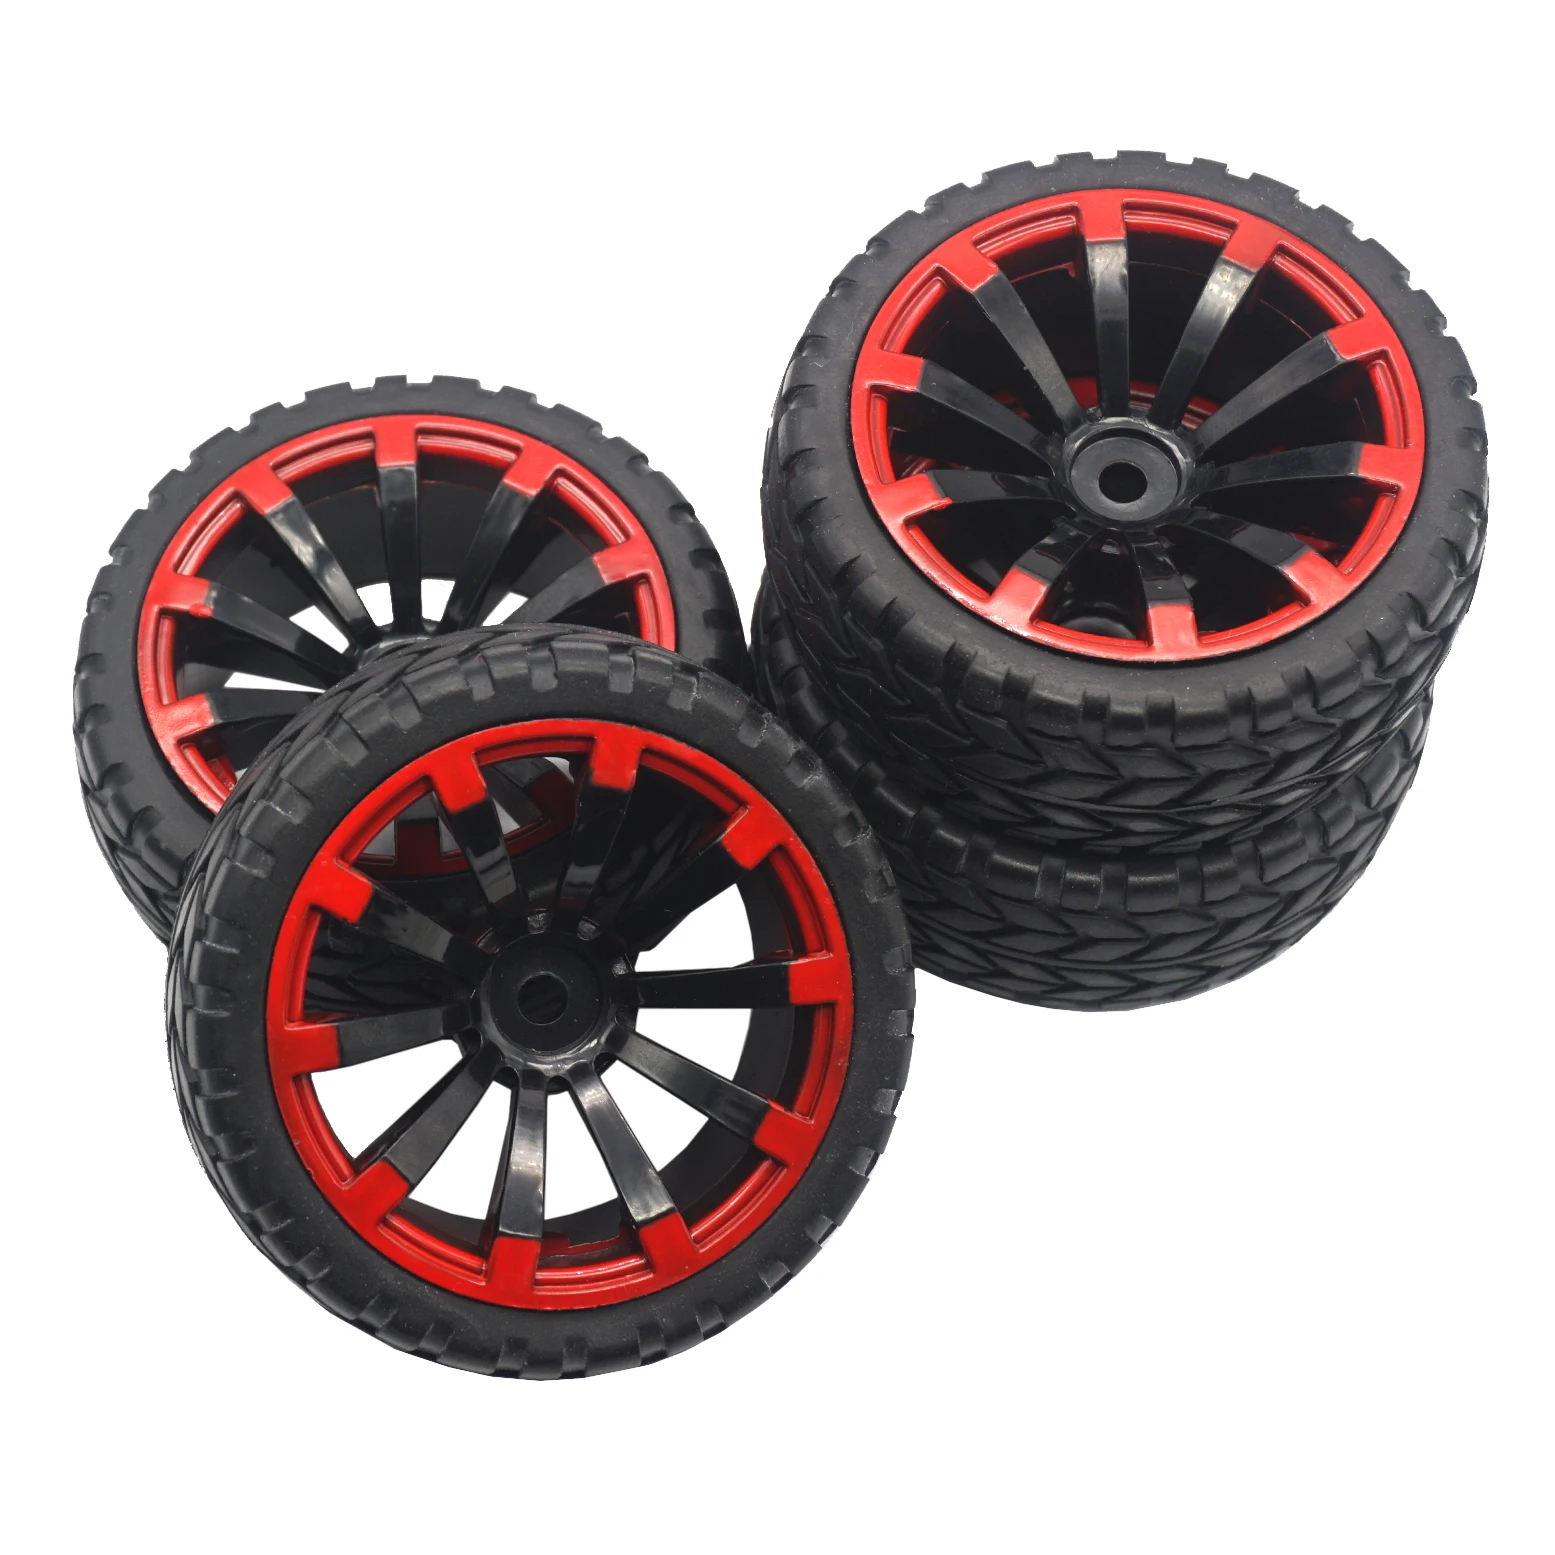 

4Pack OD 2.55" 12mm Hex Wheel Rims & Rubber Tires Set Compatible with HSP Redcat HPI Tamiya 1/10 RC On-Road Touring Drift Car